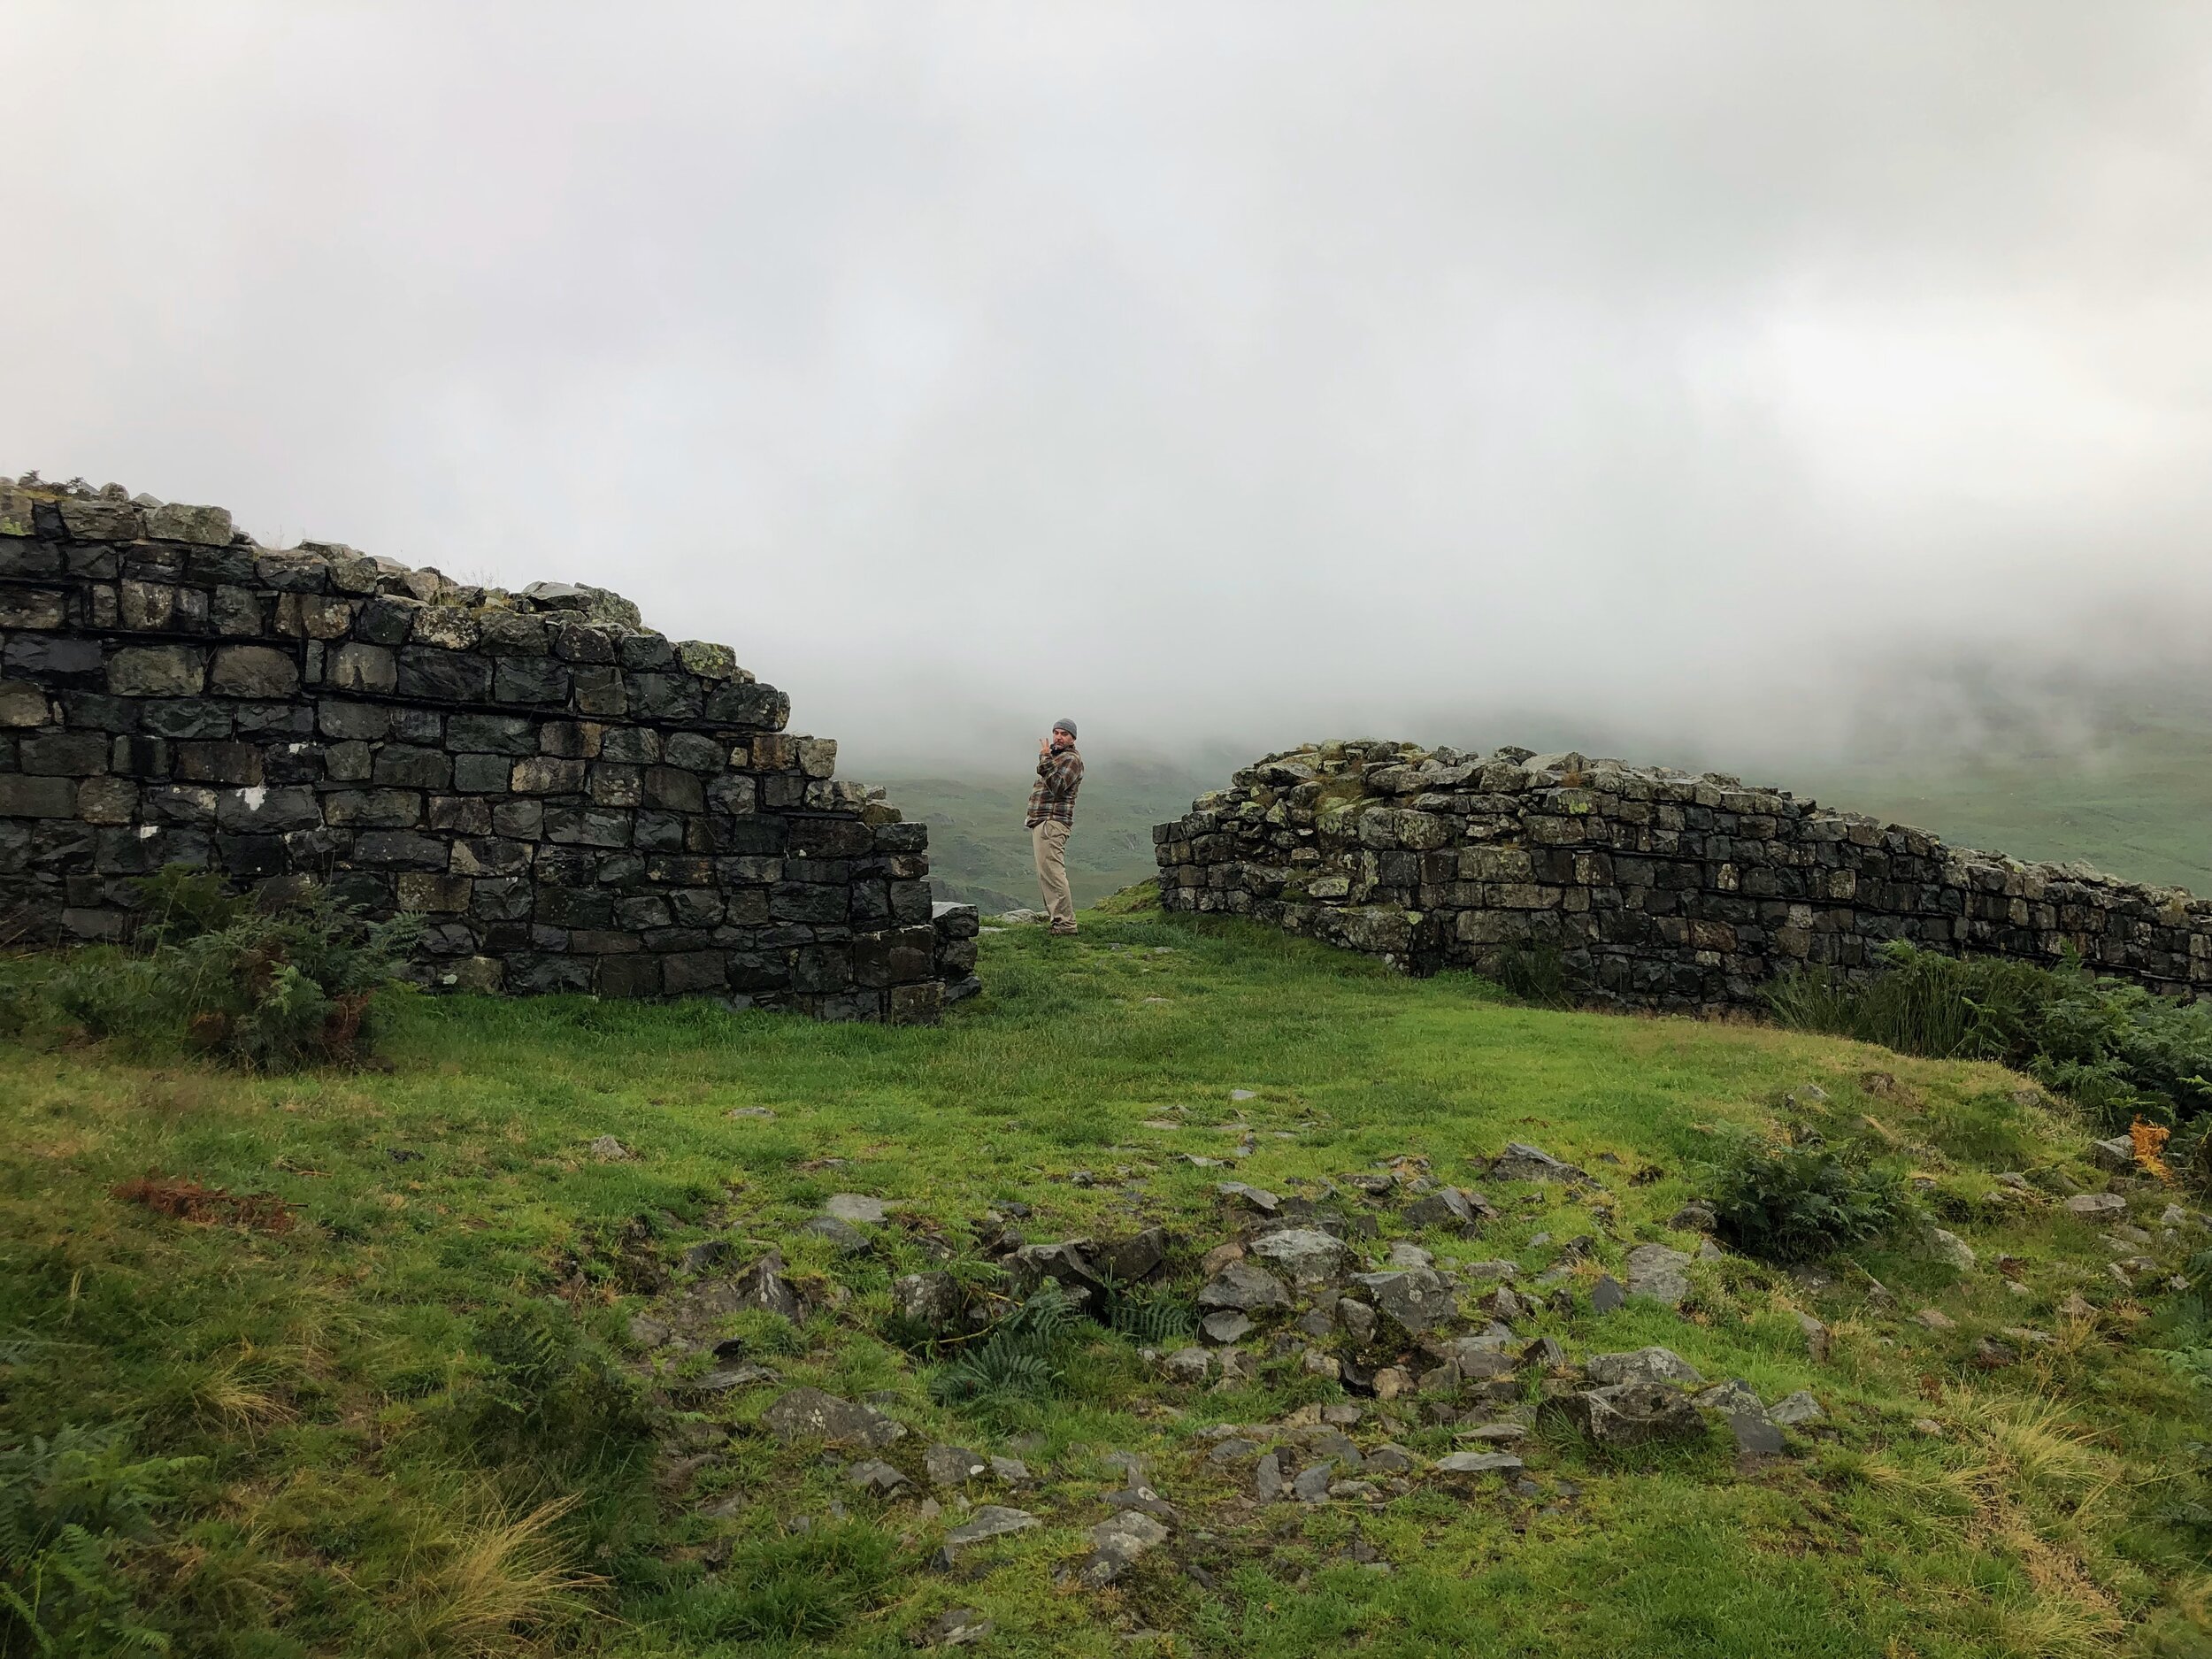 Jed at Hardknott Fort